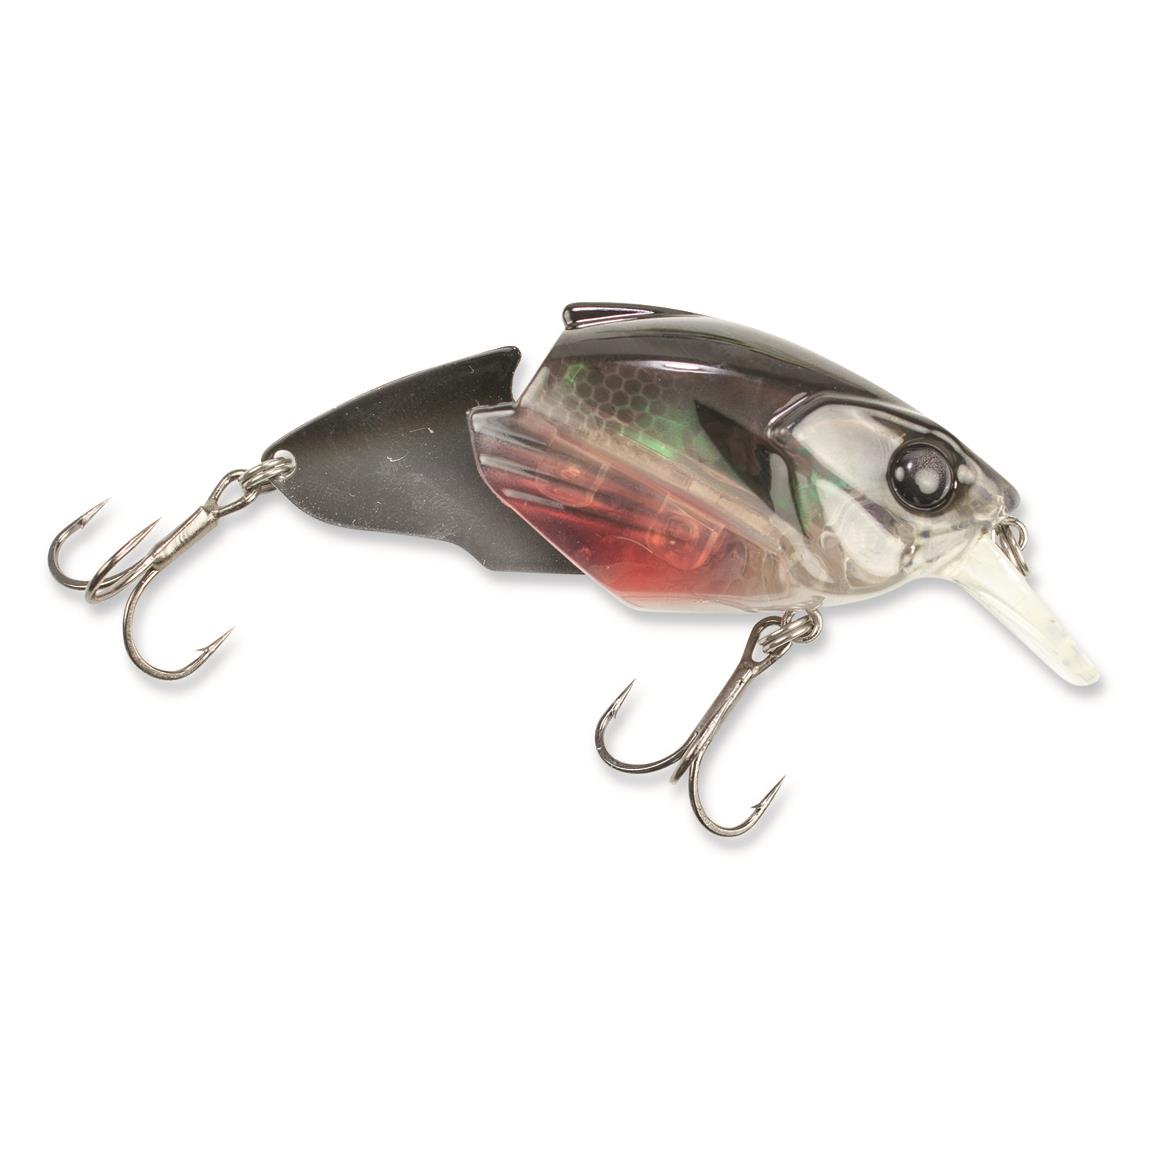 Lunkerhunt Hollow Body Prop Frog Lure - 733241, Top Water Baits at  Sportsman's Guide